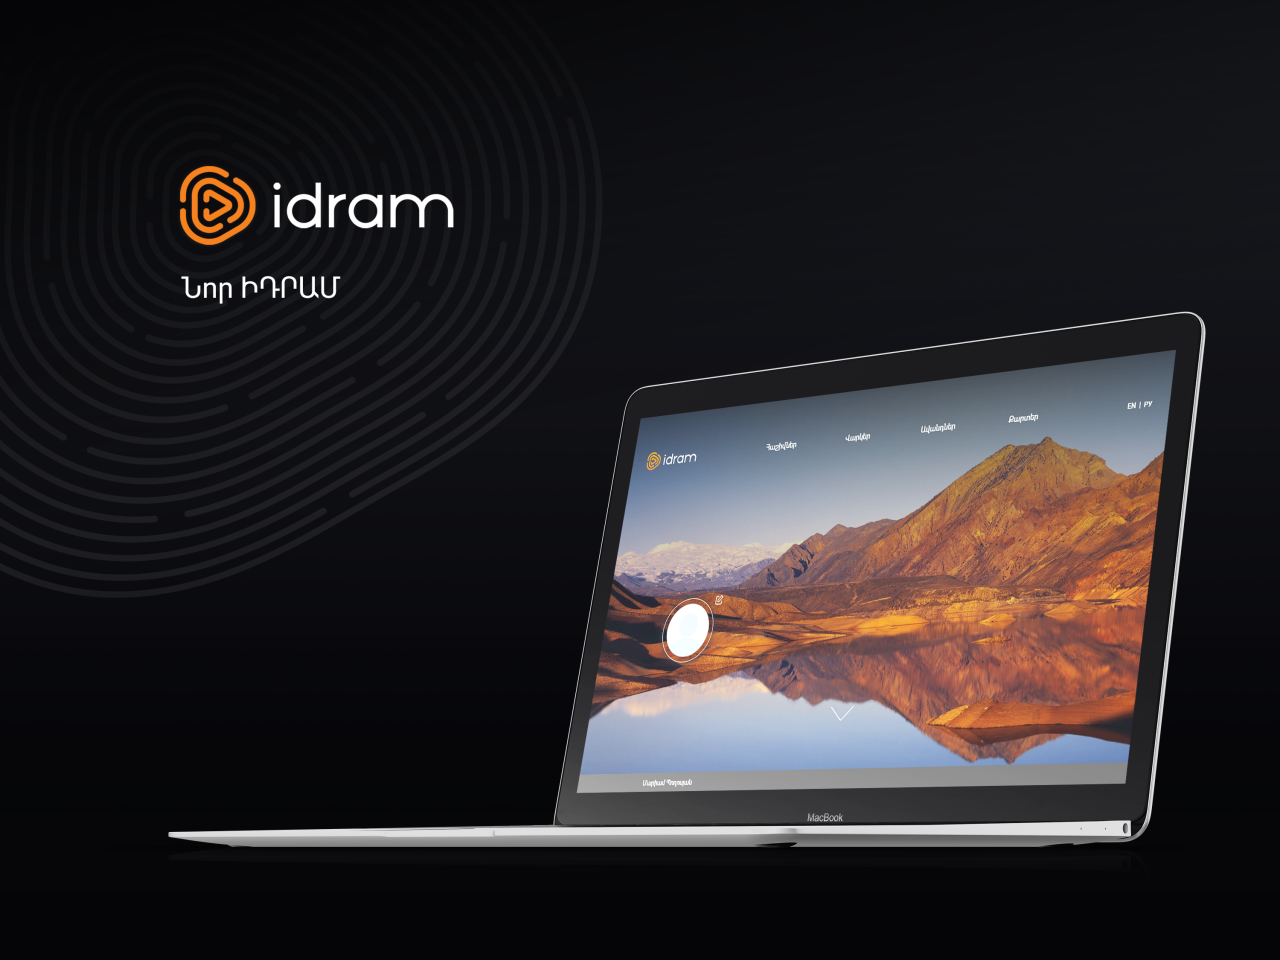 Idram with a new image and new opportunities